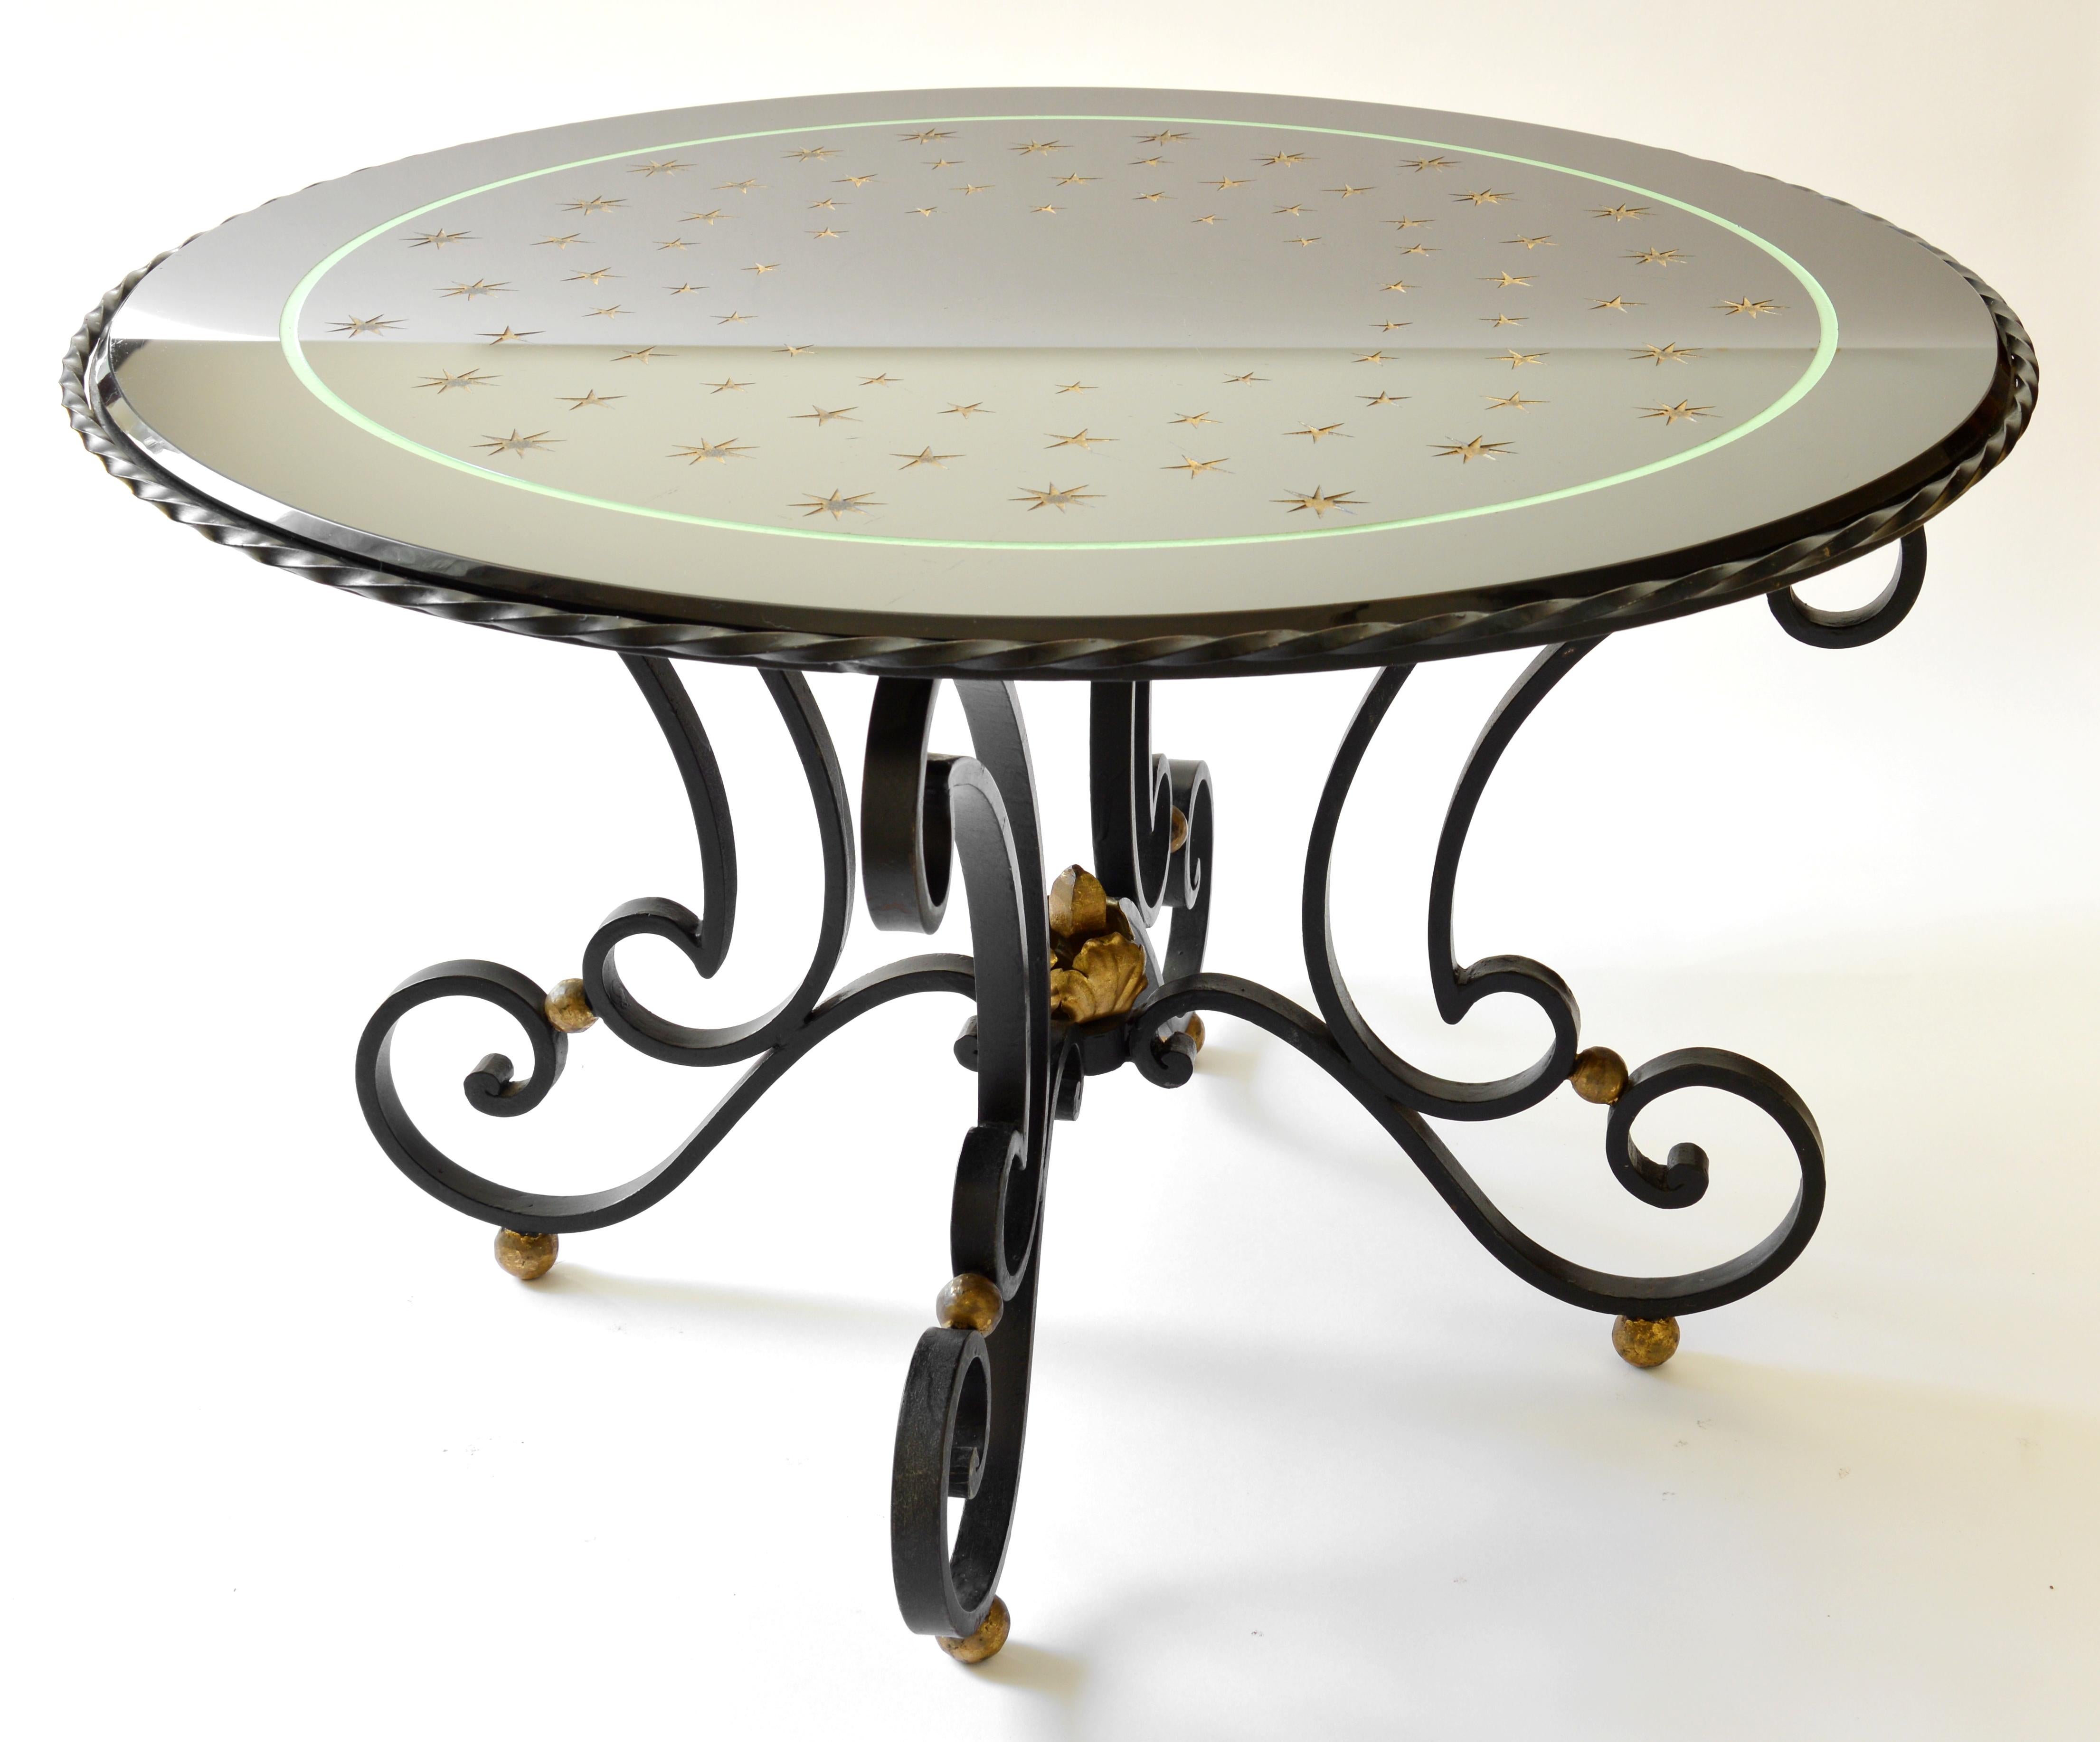 French Art Deco coffee table, France, late 1930s. Wrought-iron base with some gilded parts. The top, made of black glass, shows a swarm of stars shining in the night as the Milky Way. These stars are acid-etched and gilded. Height : 48cm - 18.9in,